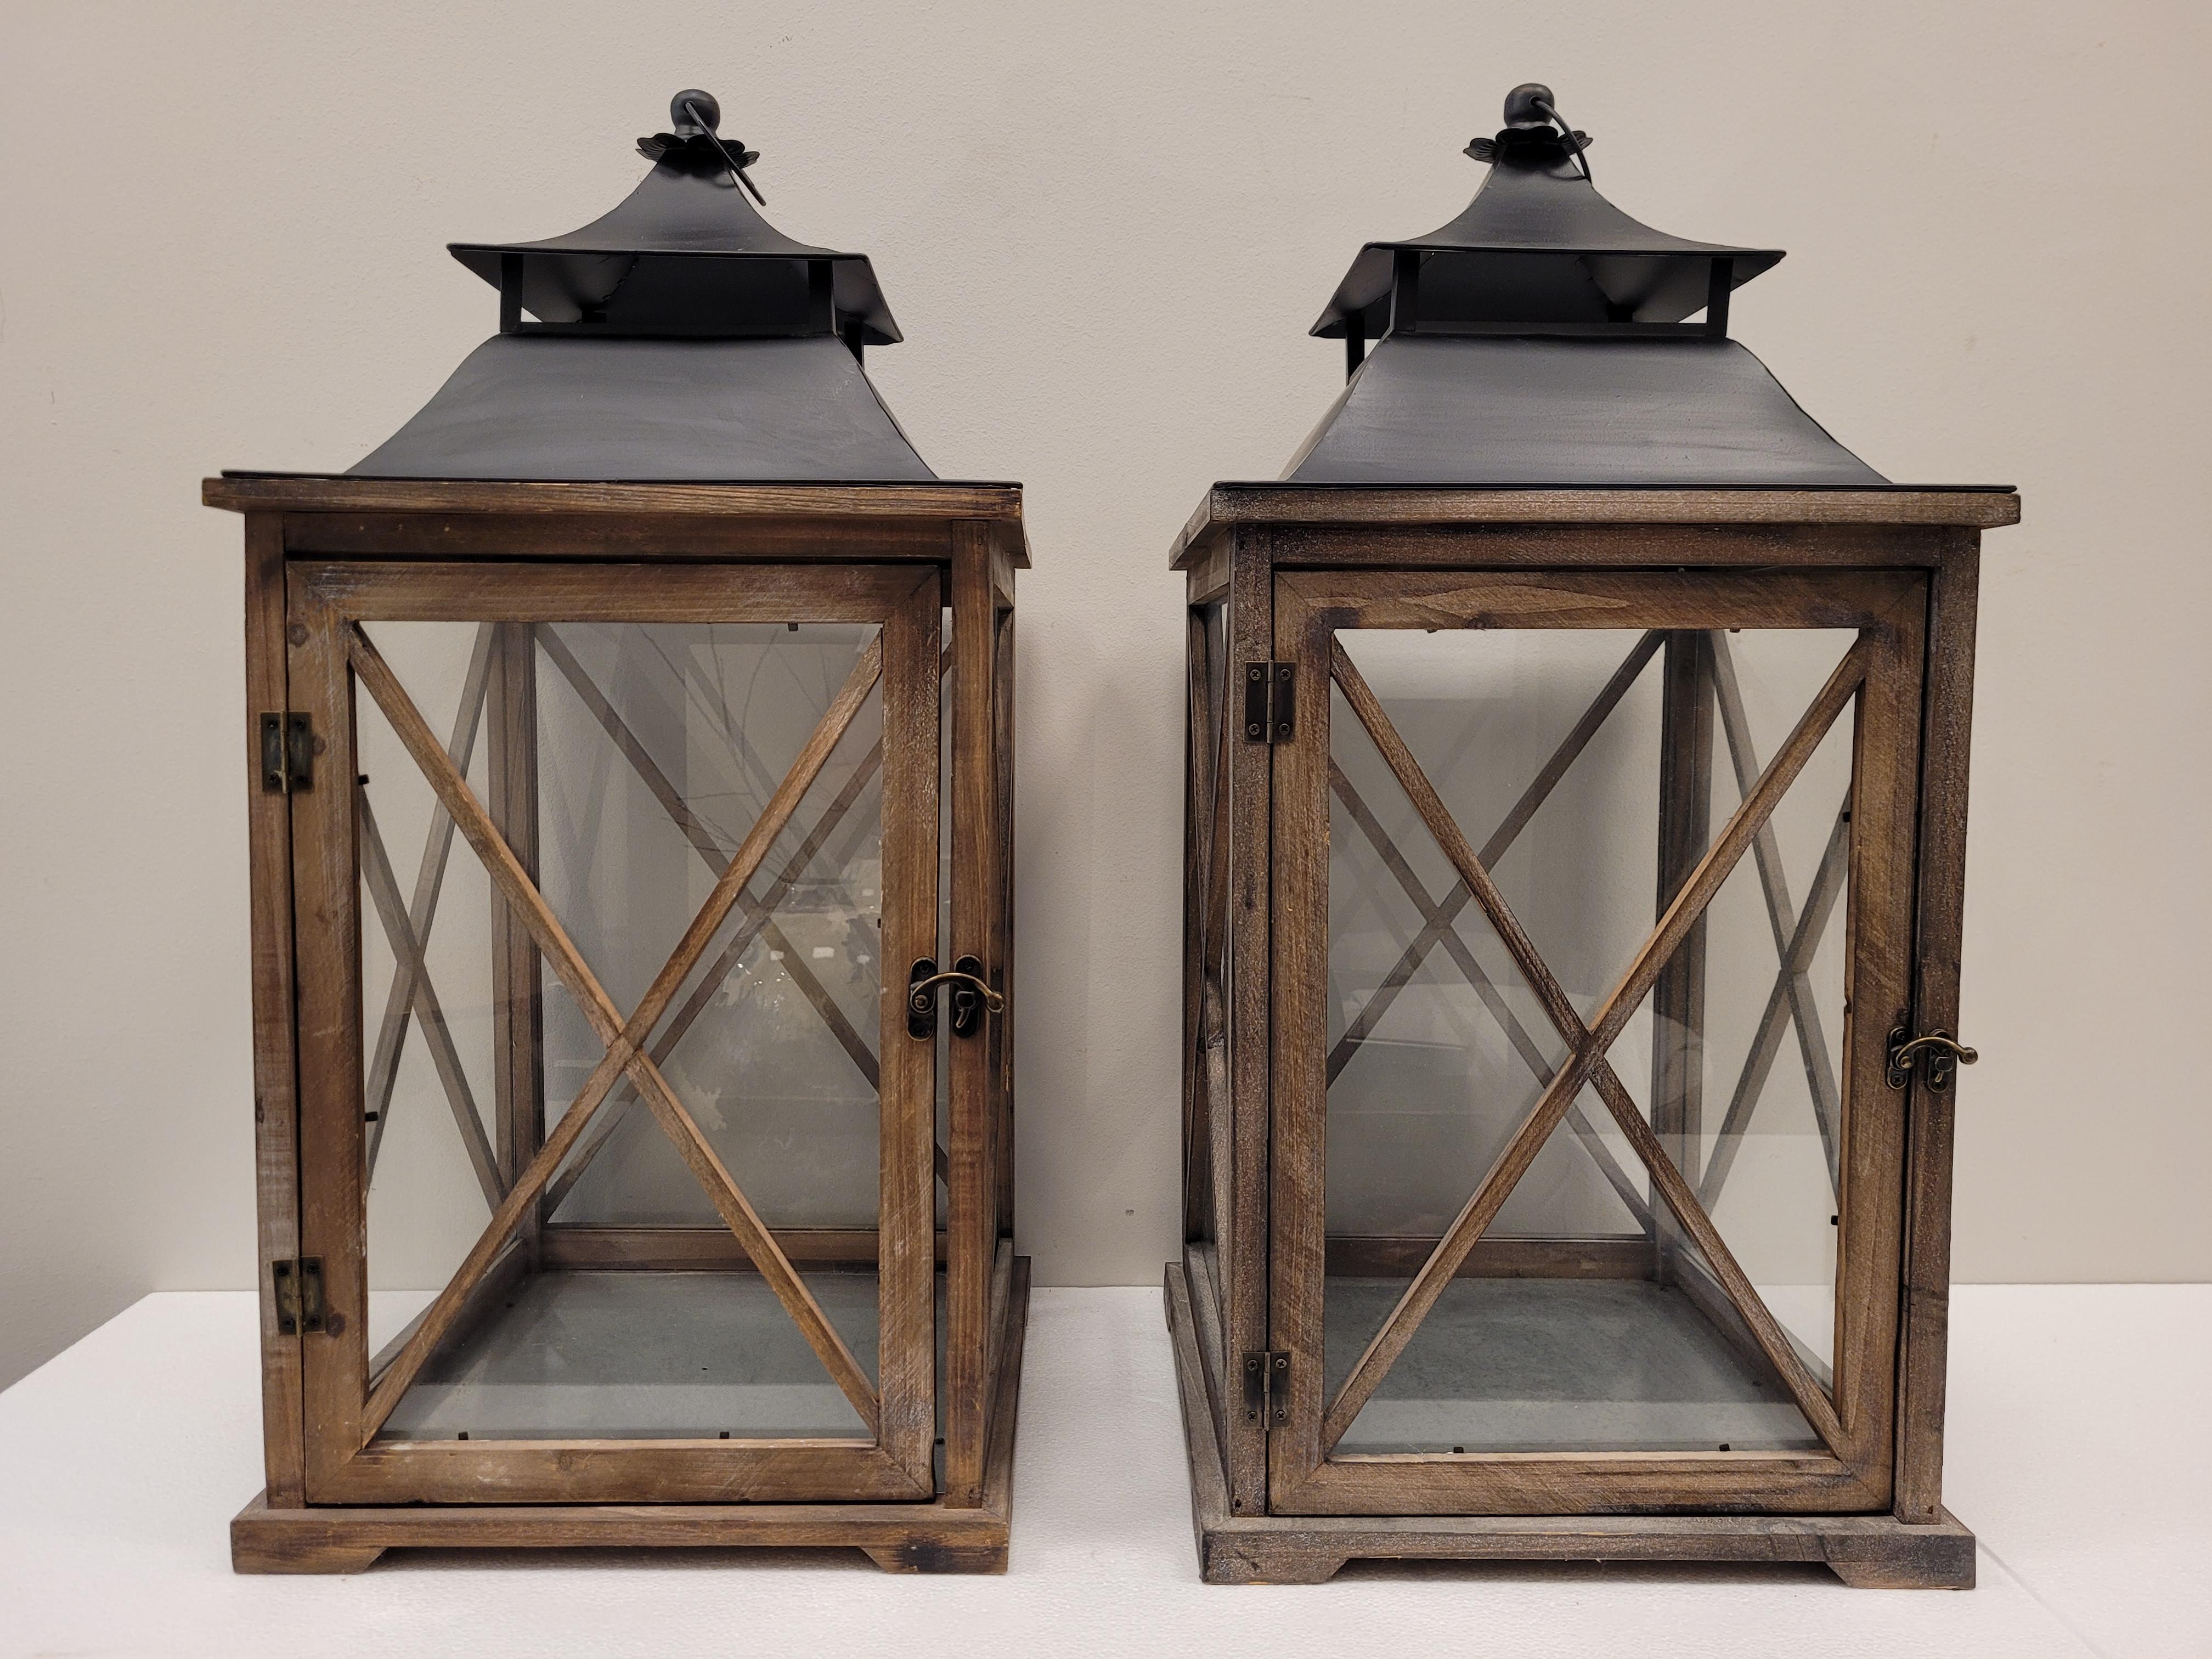 Amazing pair of photophores or lanterns for candles, France, 20th century,
In the form of small French houses with tin roofs and framed windows.
In washed oak and wrought iron on the ceiling. A side door opens, on the top it is separated on the